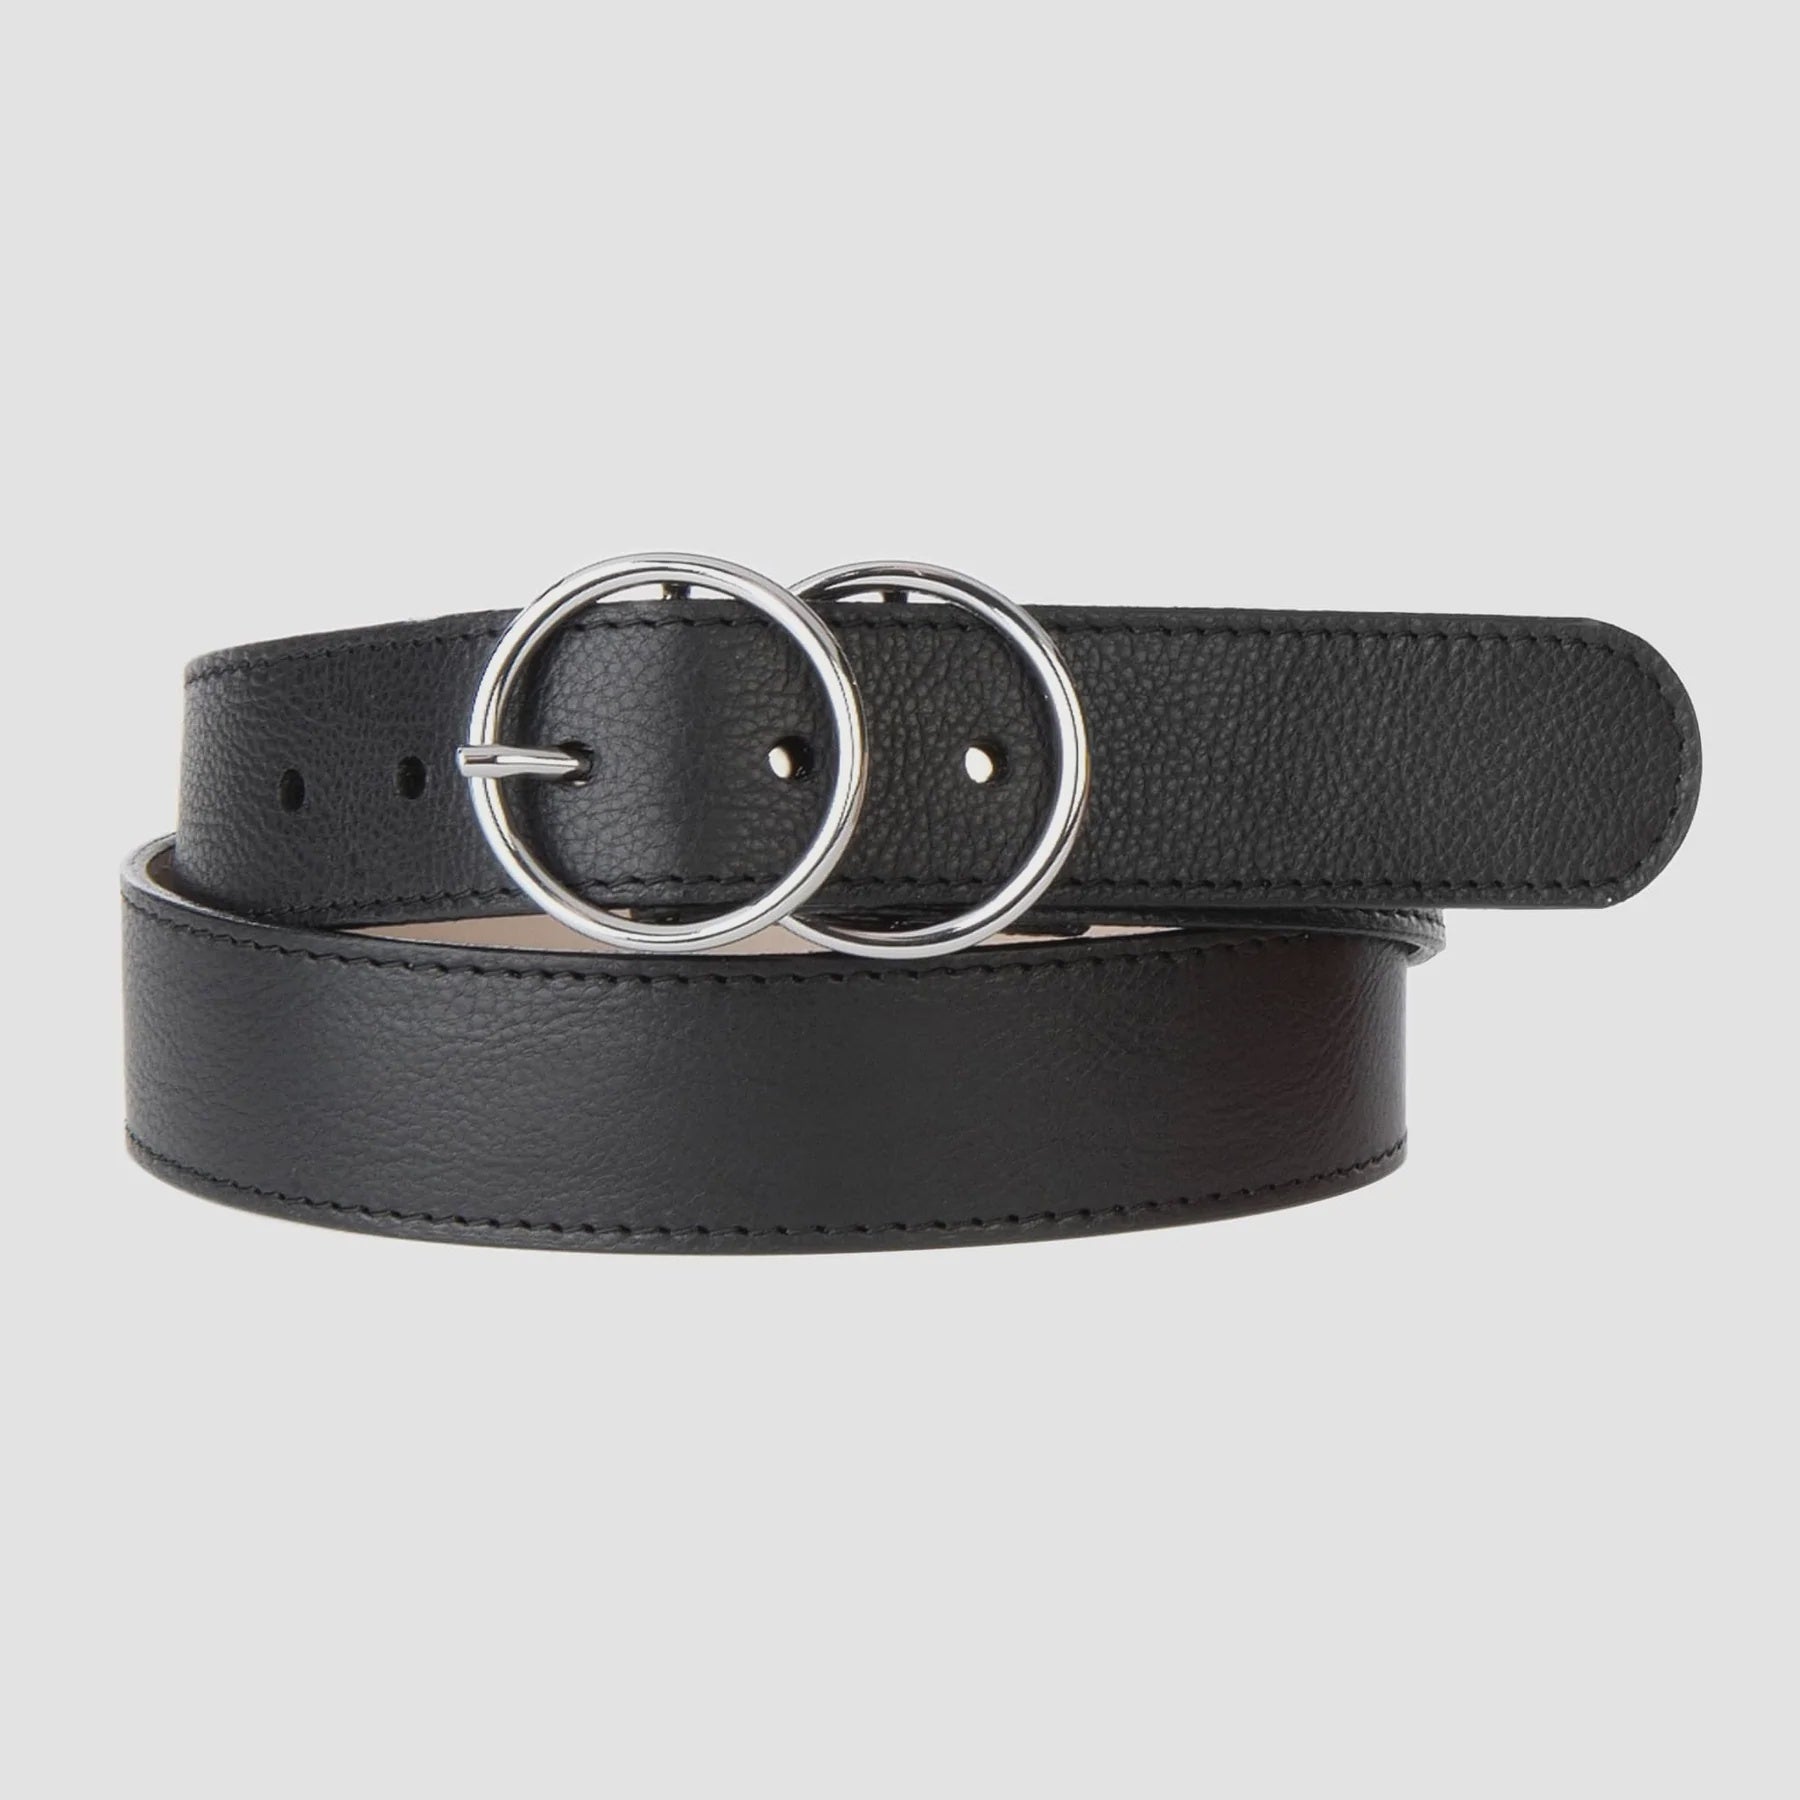 BRAVE LEATHER - WOMEN'S YAHOLO BELT IN BLACK LEATHER/SILVER HARDWARE